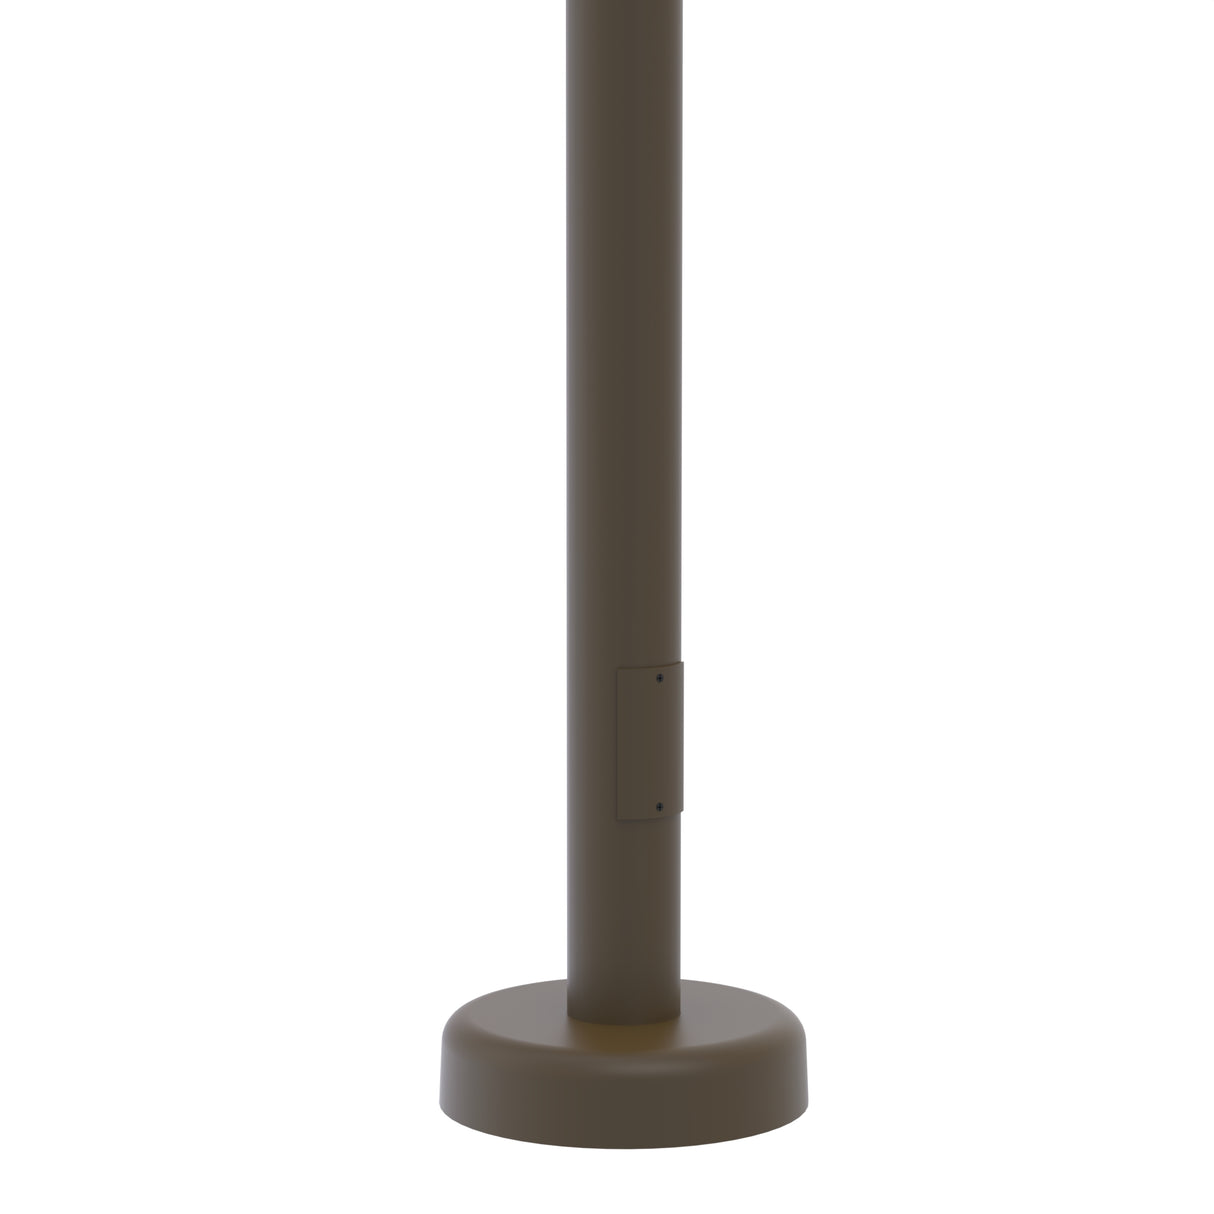 12' Tall x 4.0" OD x 0.125" Thick, Round Straight Aluminum, Hinged Anchor Base Light Pole